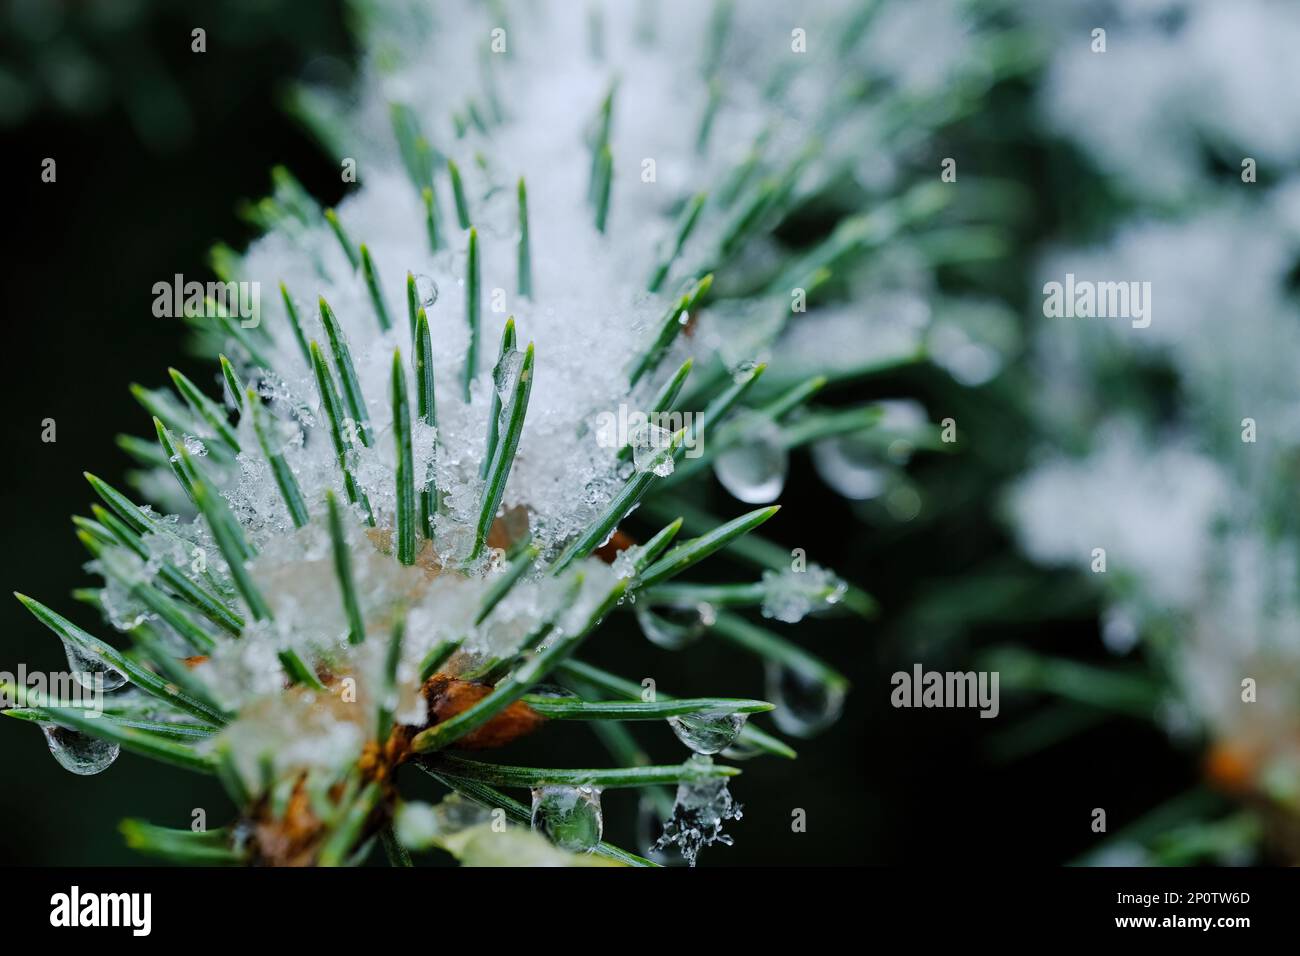 A close-up shot of Abies firma leaves with snow on them Stock Photo